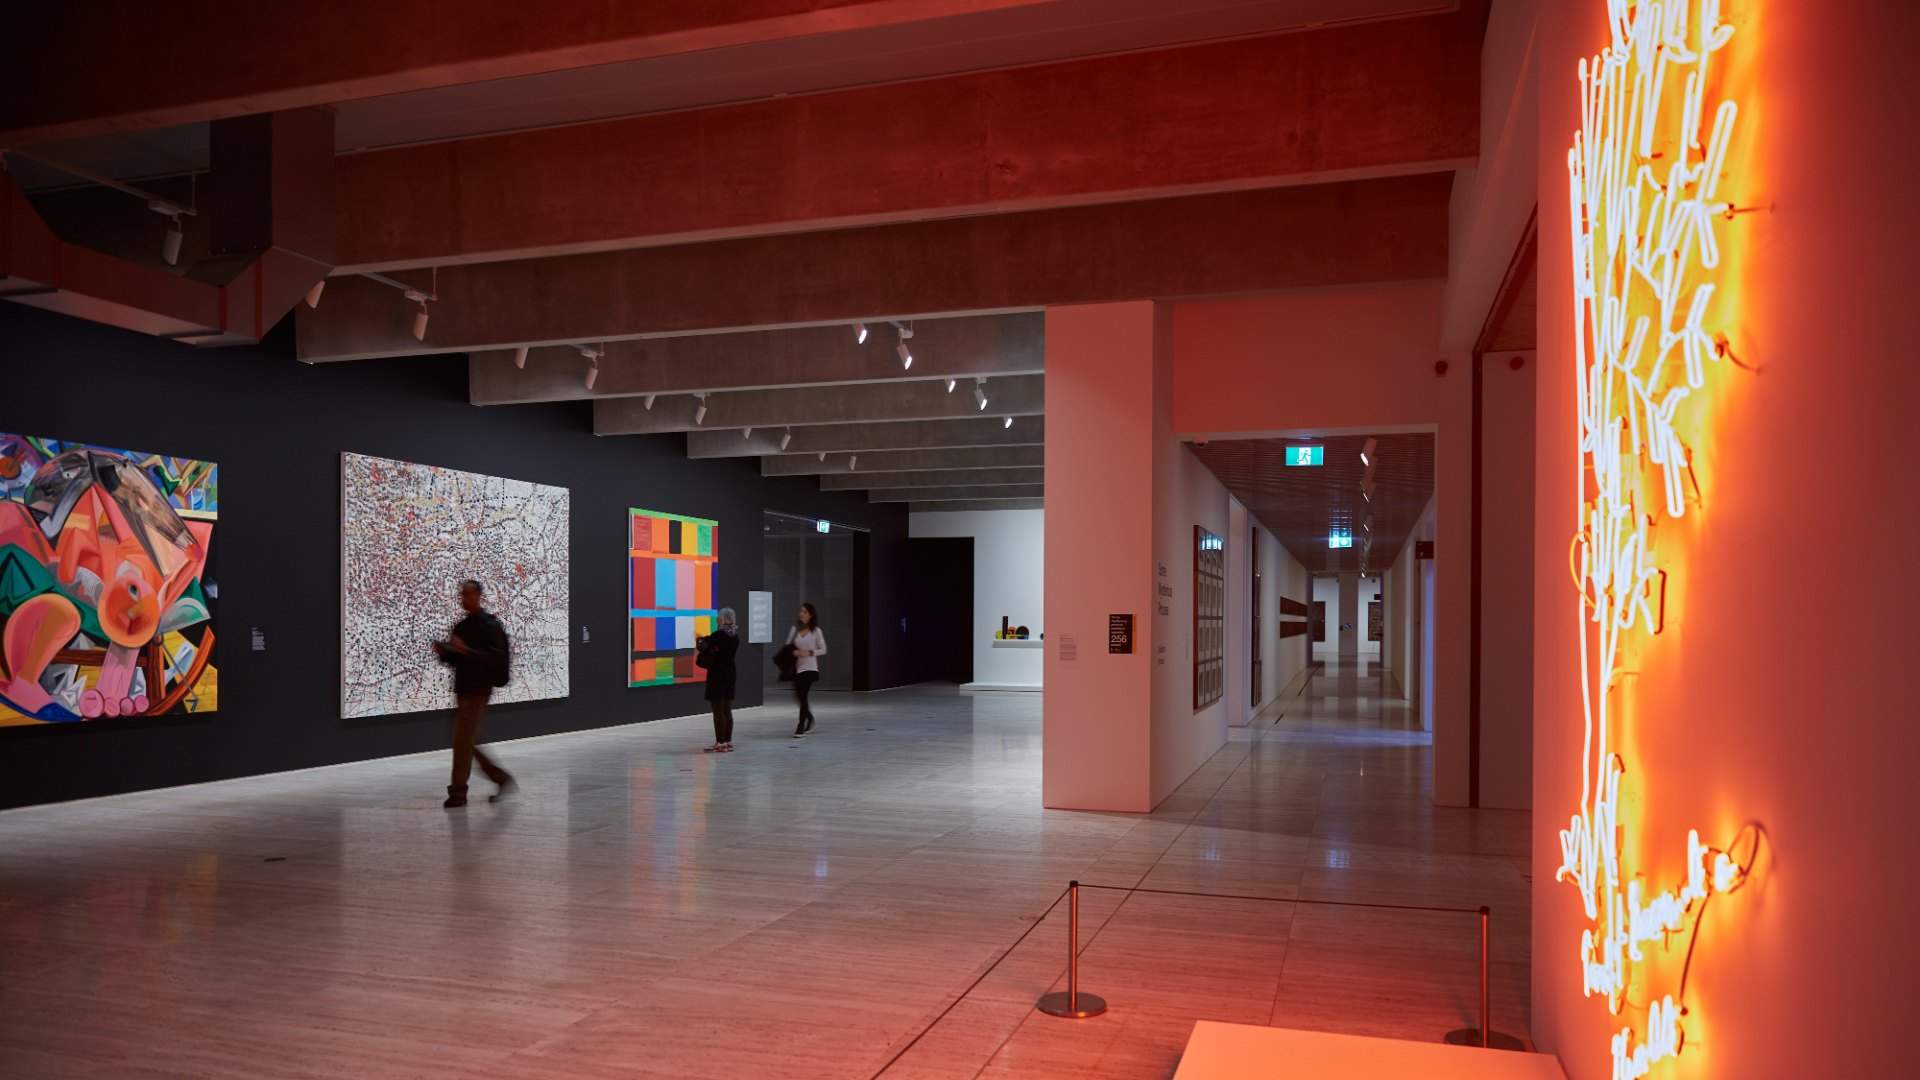 'Some Mysterious Process' Charts 50 Years Of Public Art Collecting at the Art Gallery of NSW